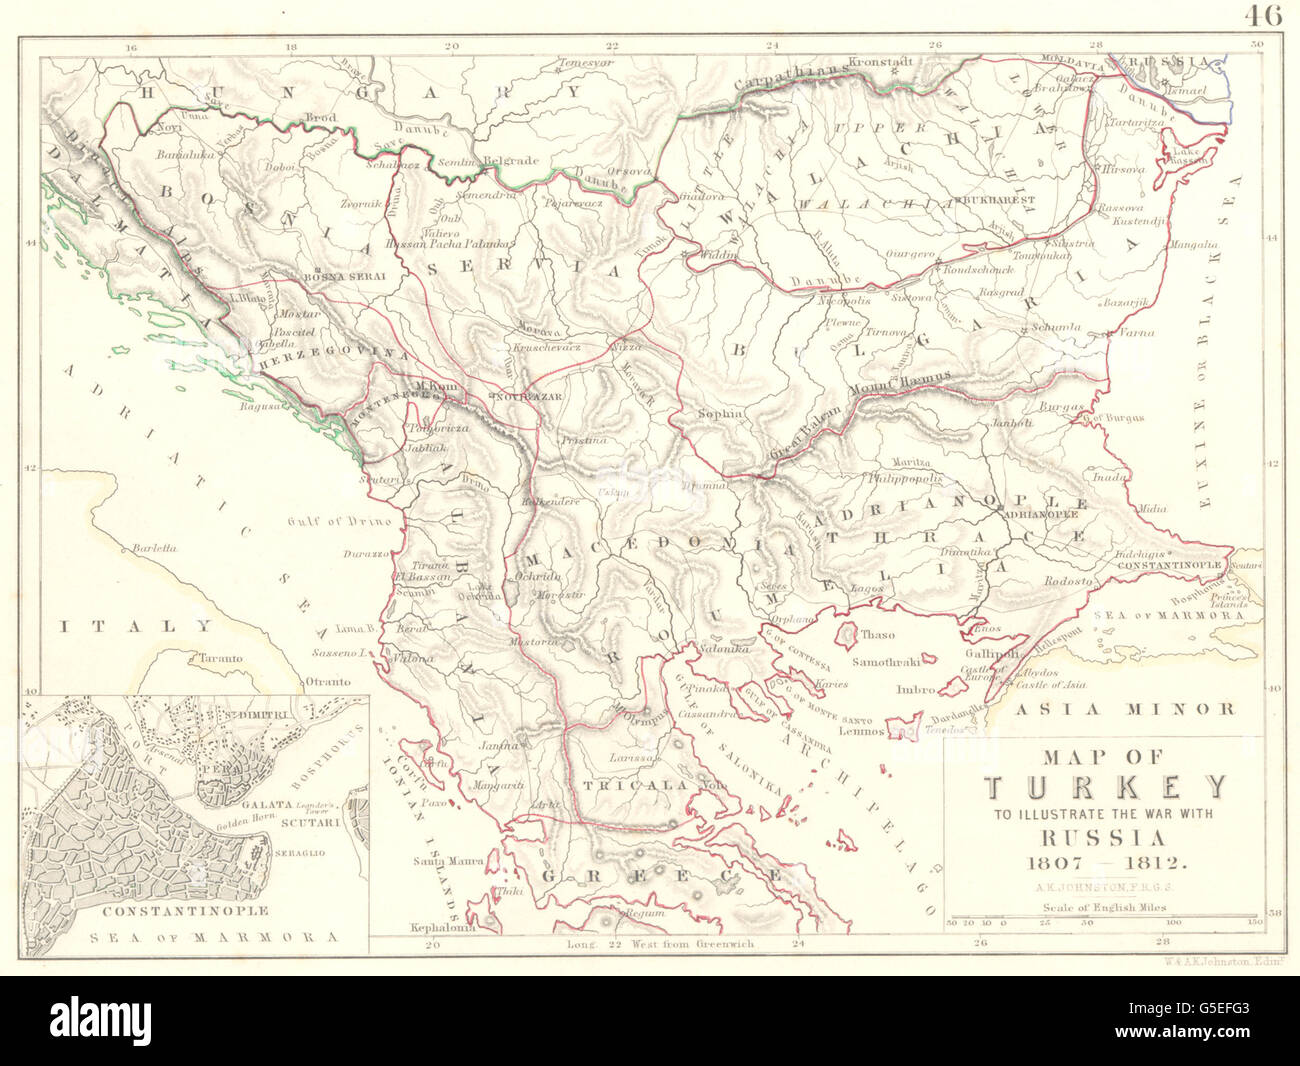 TURKEY: Map to Illustrate the war with Russia 1807-1812. Balkans Greece 1848 Stock Photo